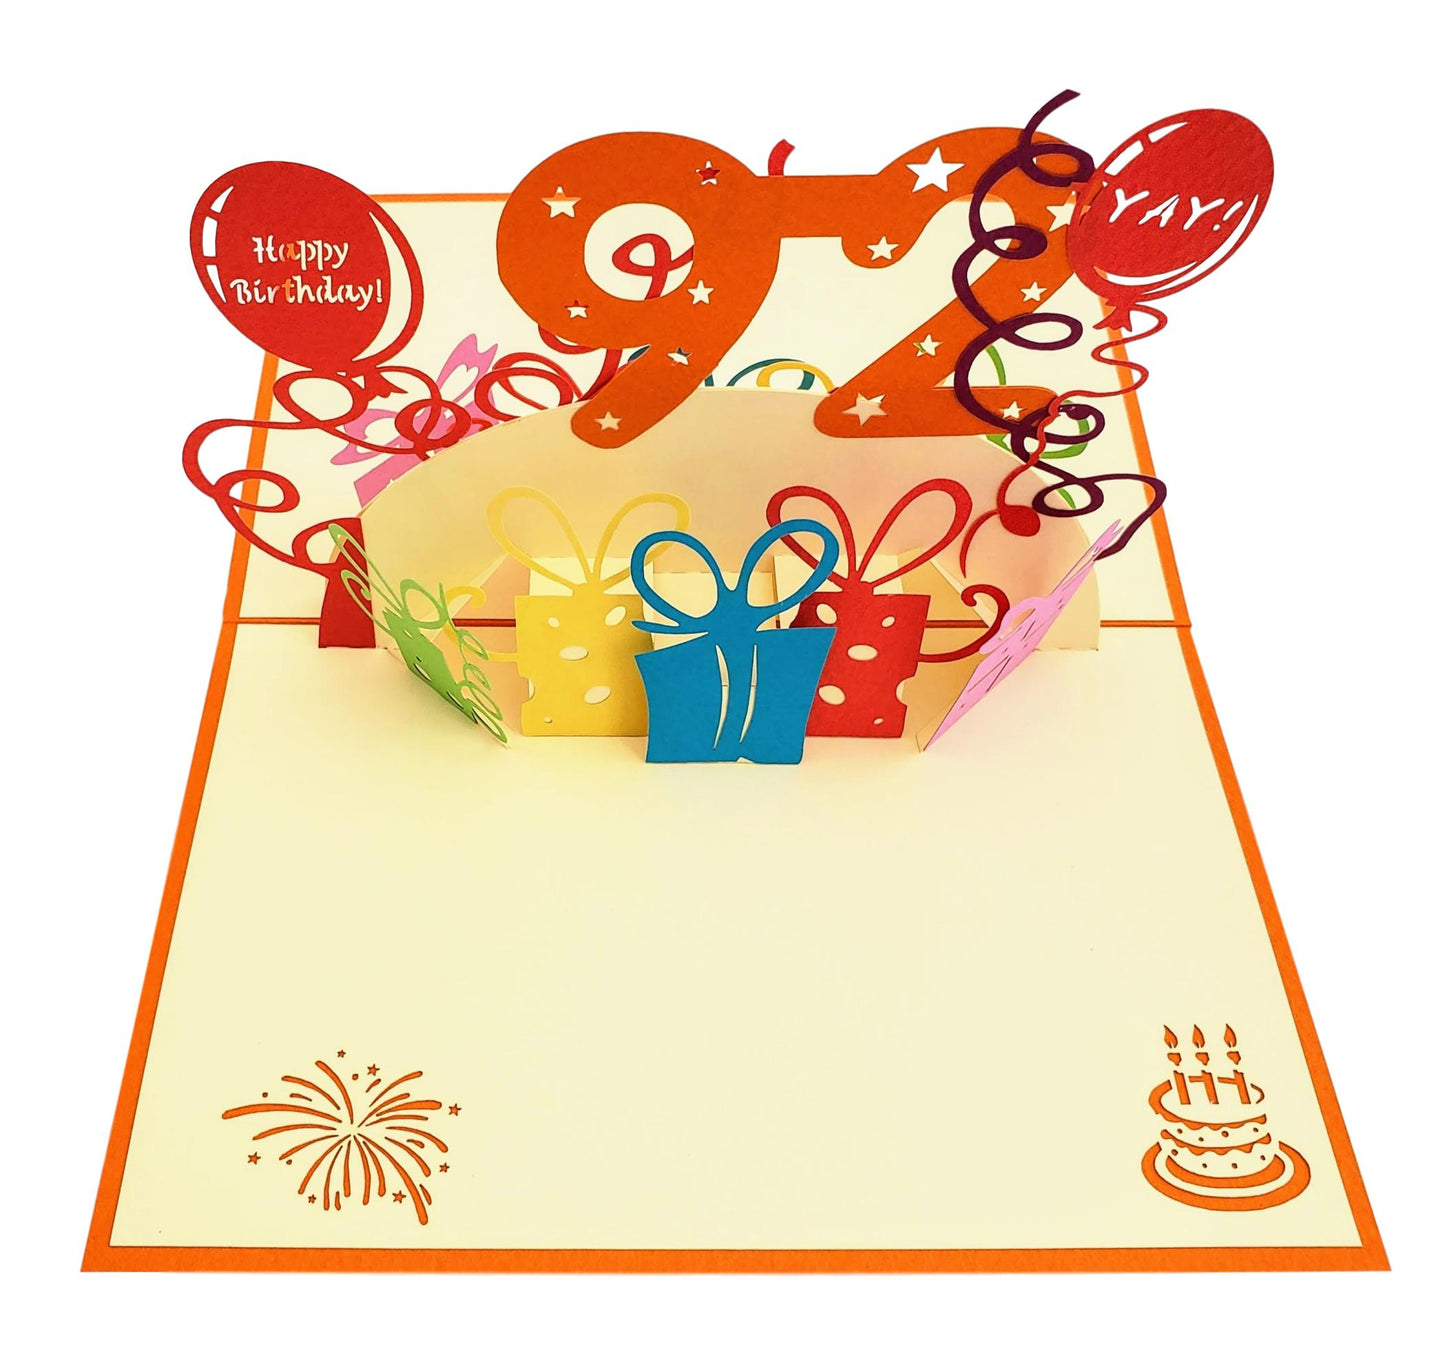 Happy 92nd Birthday with Presents 3D Pop Up Greeting Card - Birthday - funny birthday - Happy Birthd - iGifts And Cards